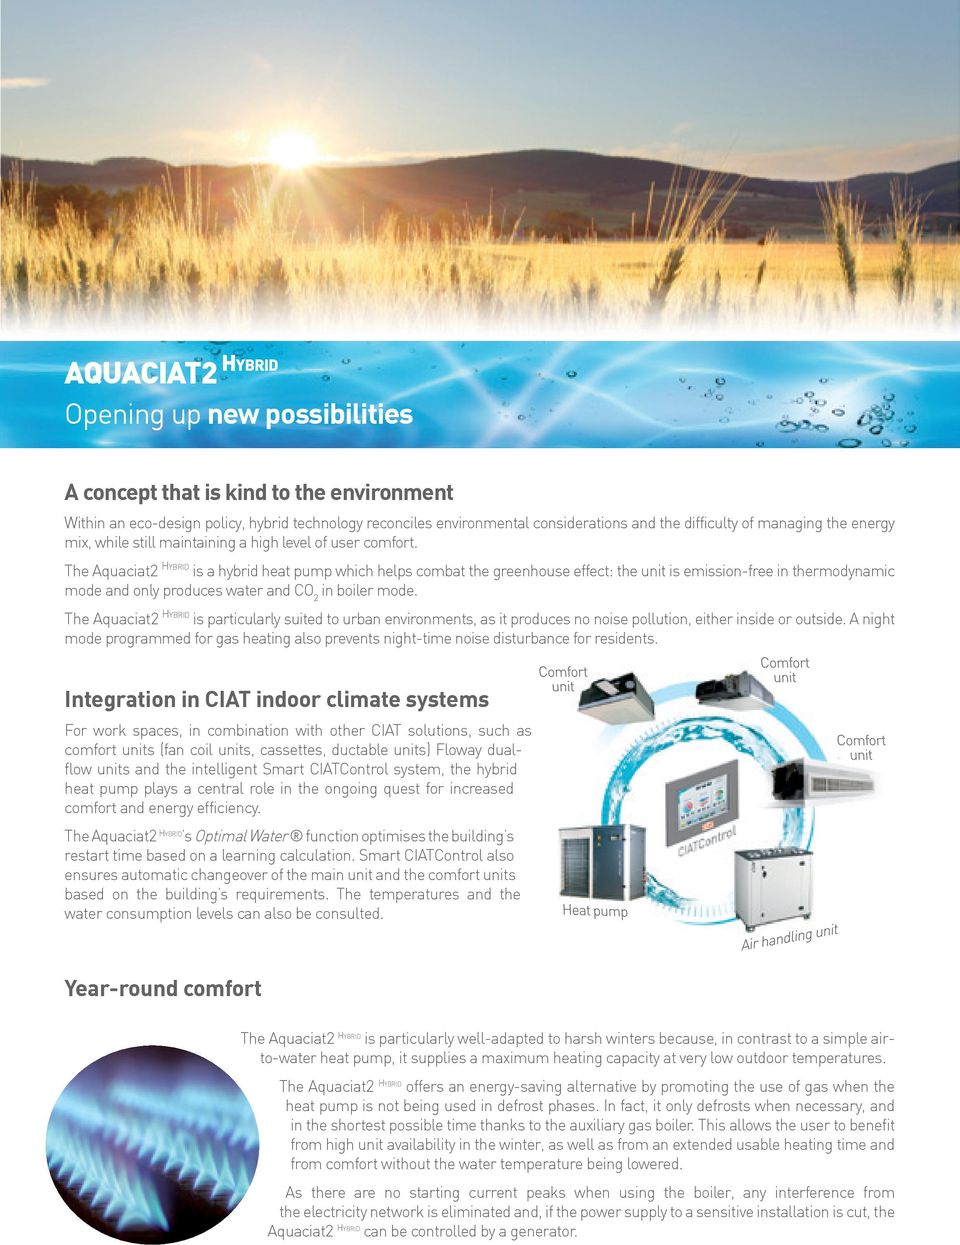 The Aquaciat2 HYBRID is a hybrid heat pump which helps combat the greenhouse effect: the unit is emission-free in thermodynamic mode and only produces water and CO 2 in boiler mode.